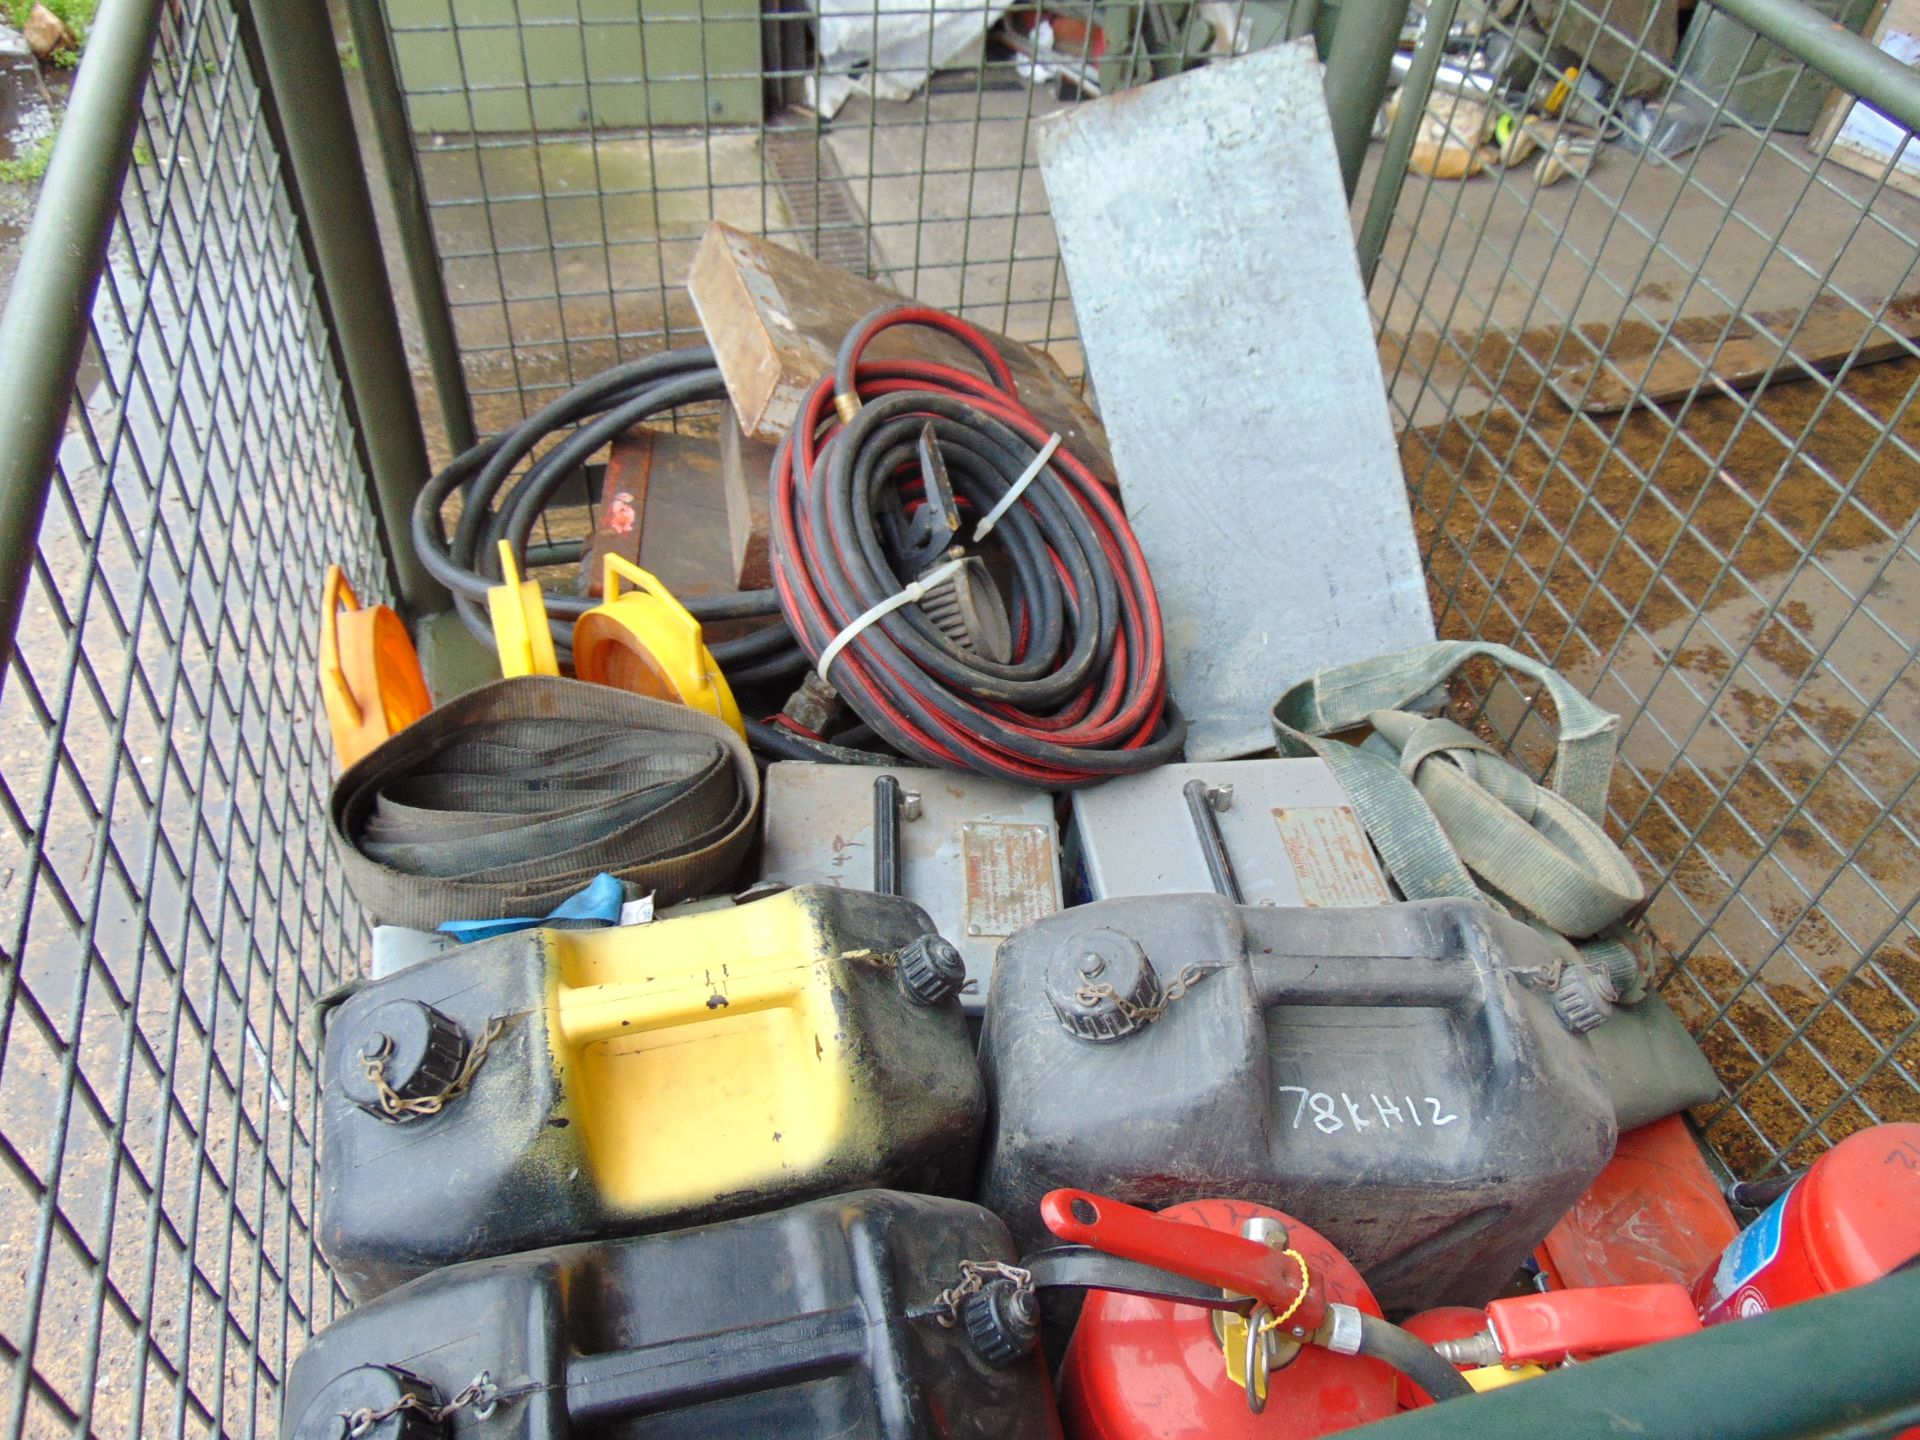 1 x Stillage Air Lines Wheel Chocks, Jerry Cans, Cooking Vessels, Ratchet Straps, Fire Extinguisher - Image 4 of 6